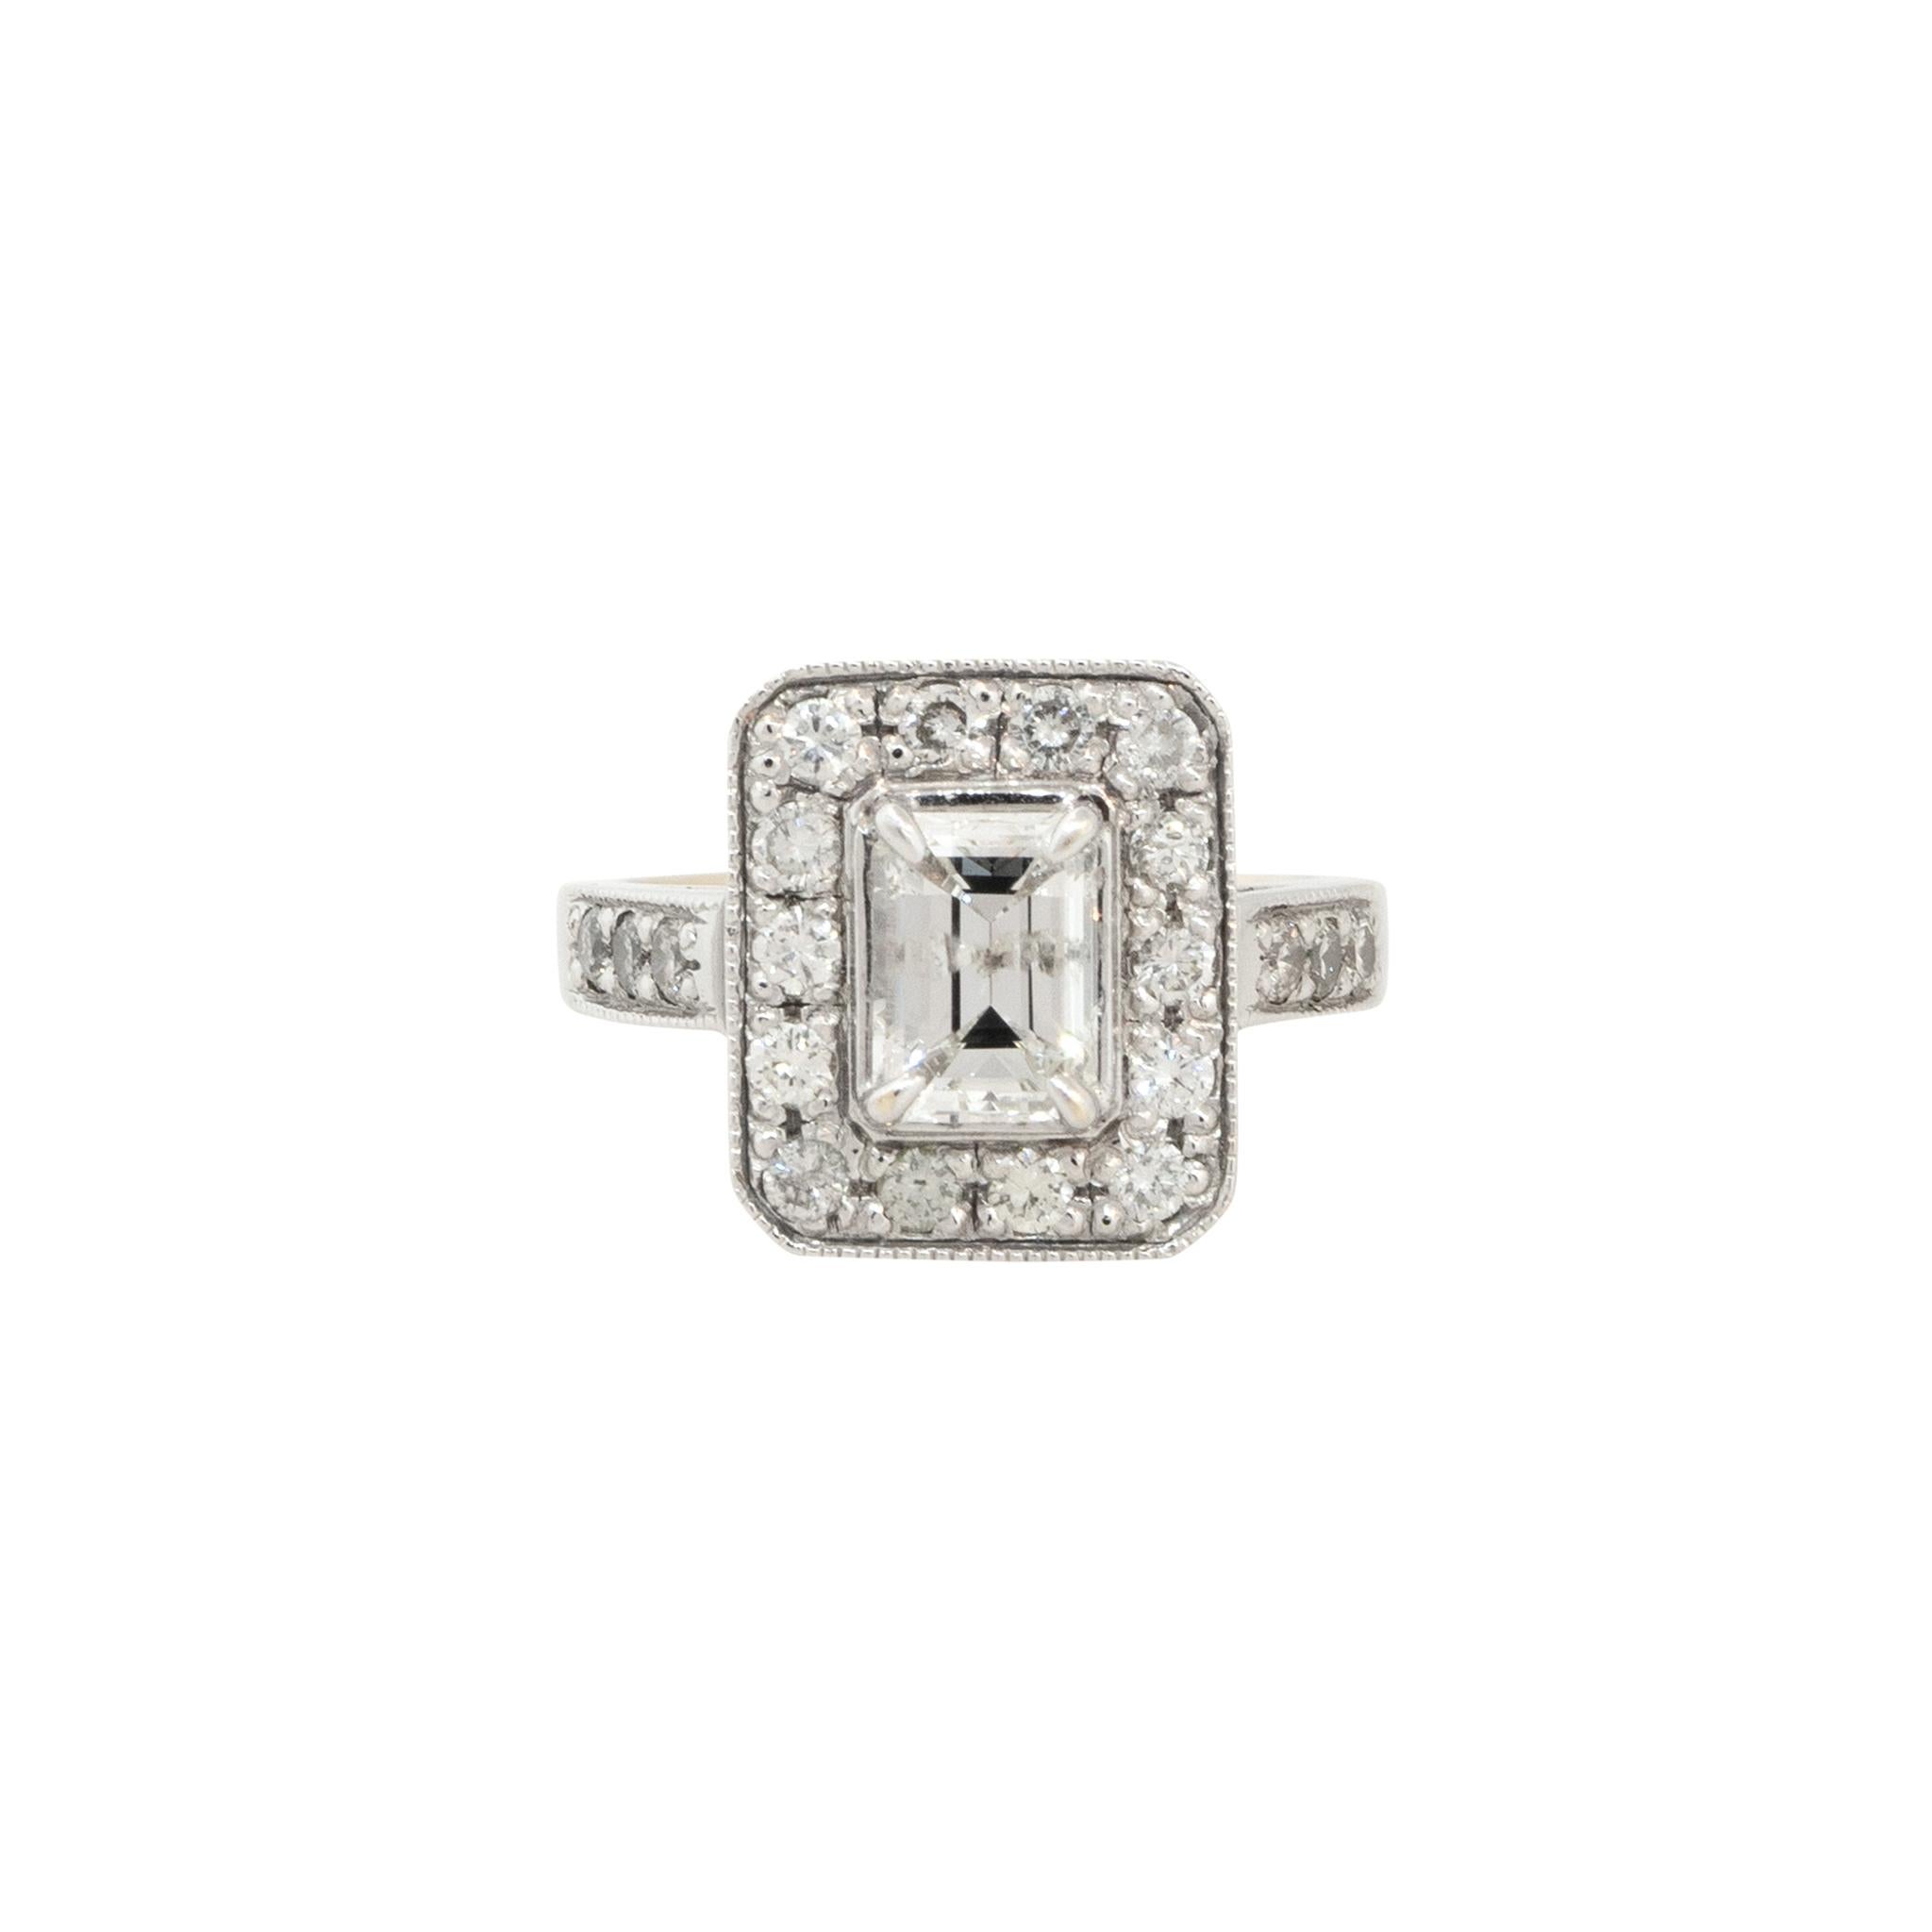 14k White Gold 1.60ctw Emerald Cut Diamond Halo Engagement Ring

Style: Emerald Diamond Halo Engagement Ring
Material: 14k White Gold
Main Diamond Details: Approx. 1.10ctw Emerald Cut Diamond. The Diamond is G/H in color and SI3-I1 in